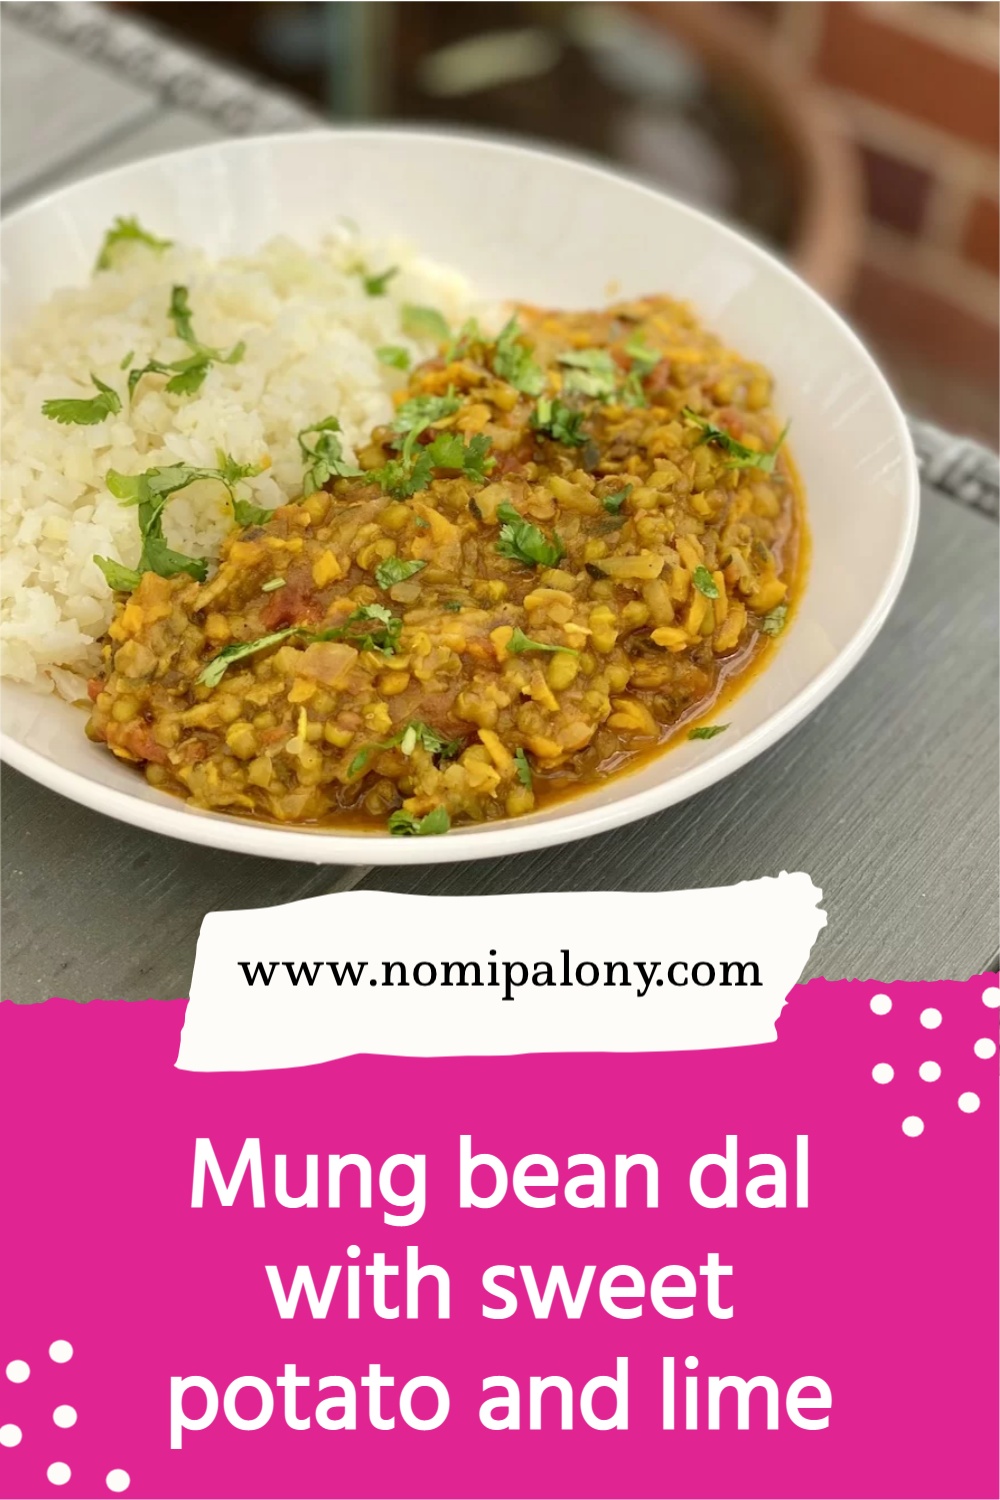 mung bean dal with sweet potato and lime in a bowl on a table with cauliflower rice and coriander